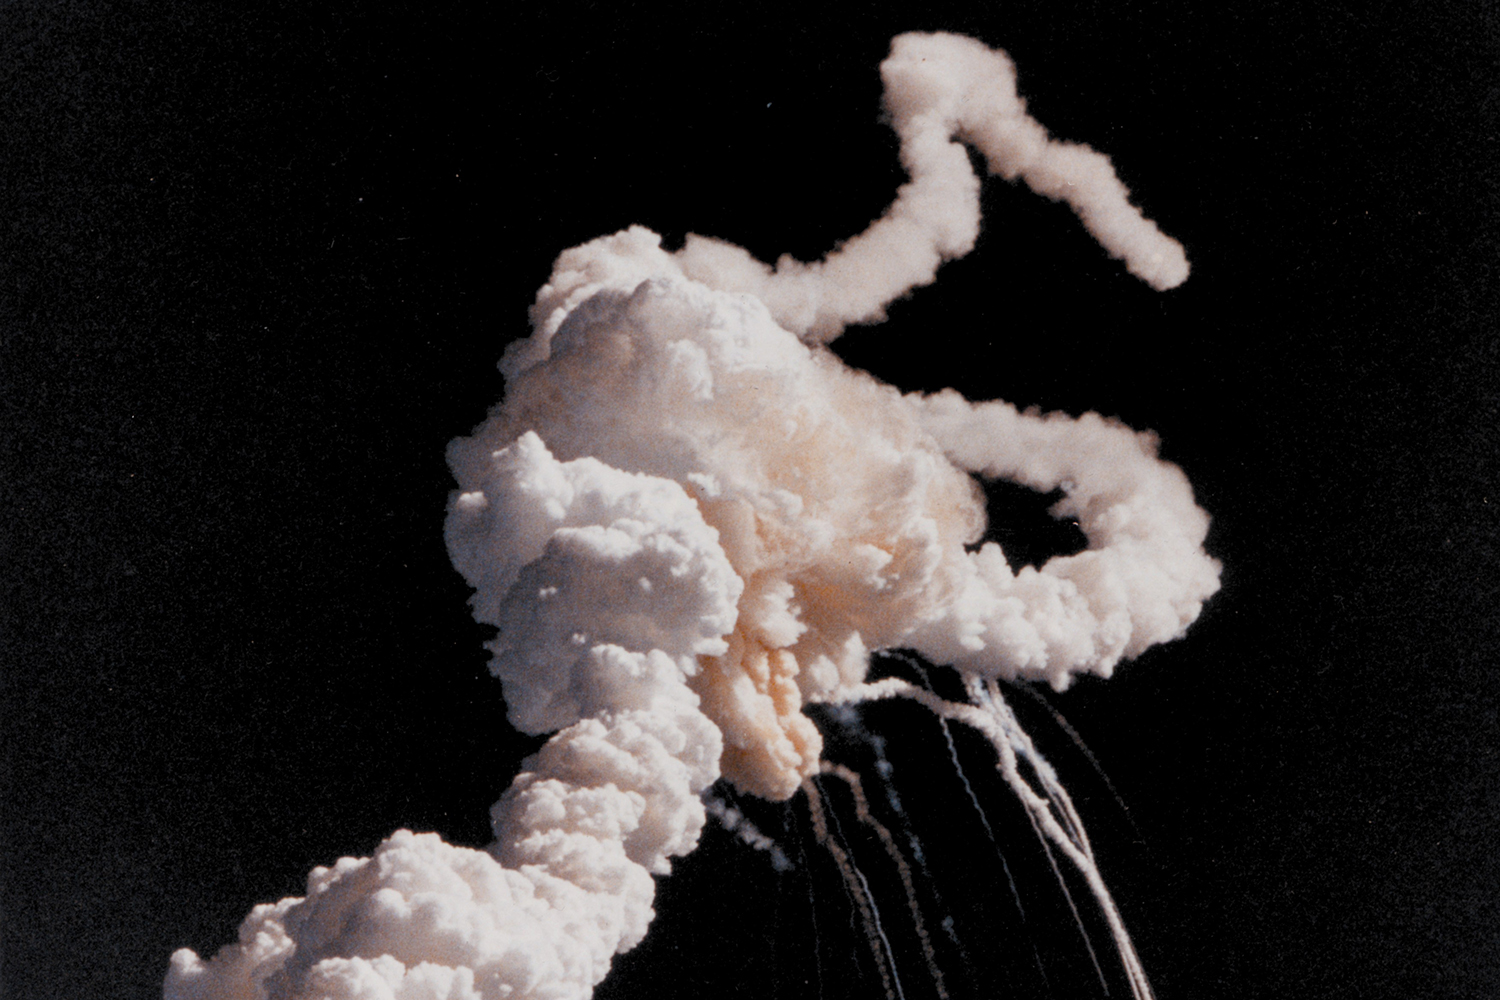 The Space Shuttle Challenger explodes shortly after takeoff, 28 January 1986.